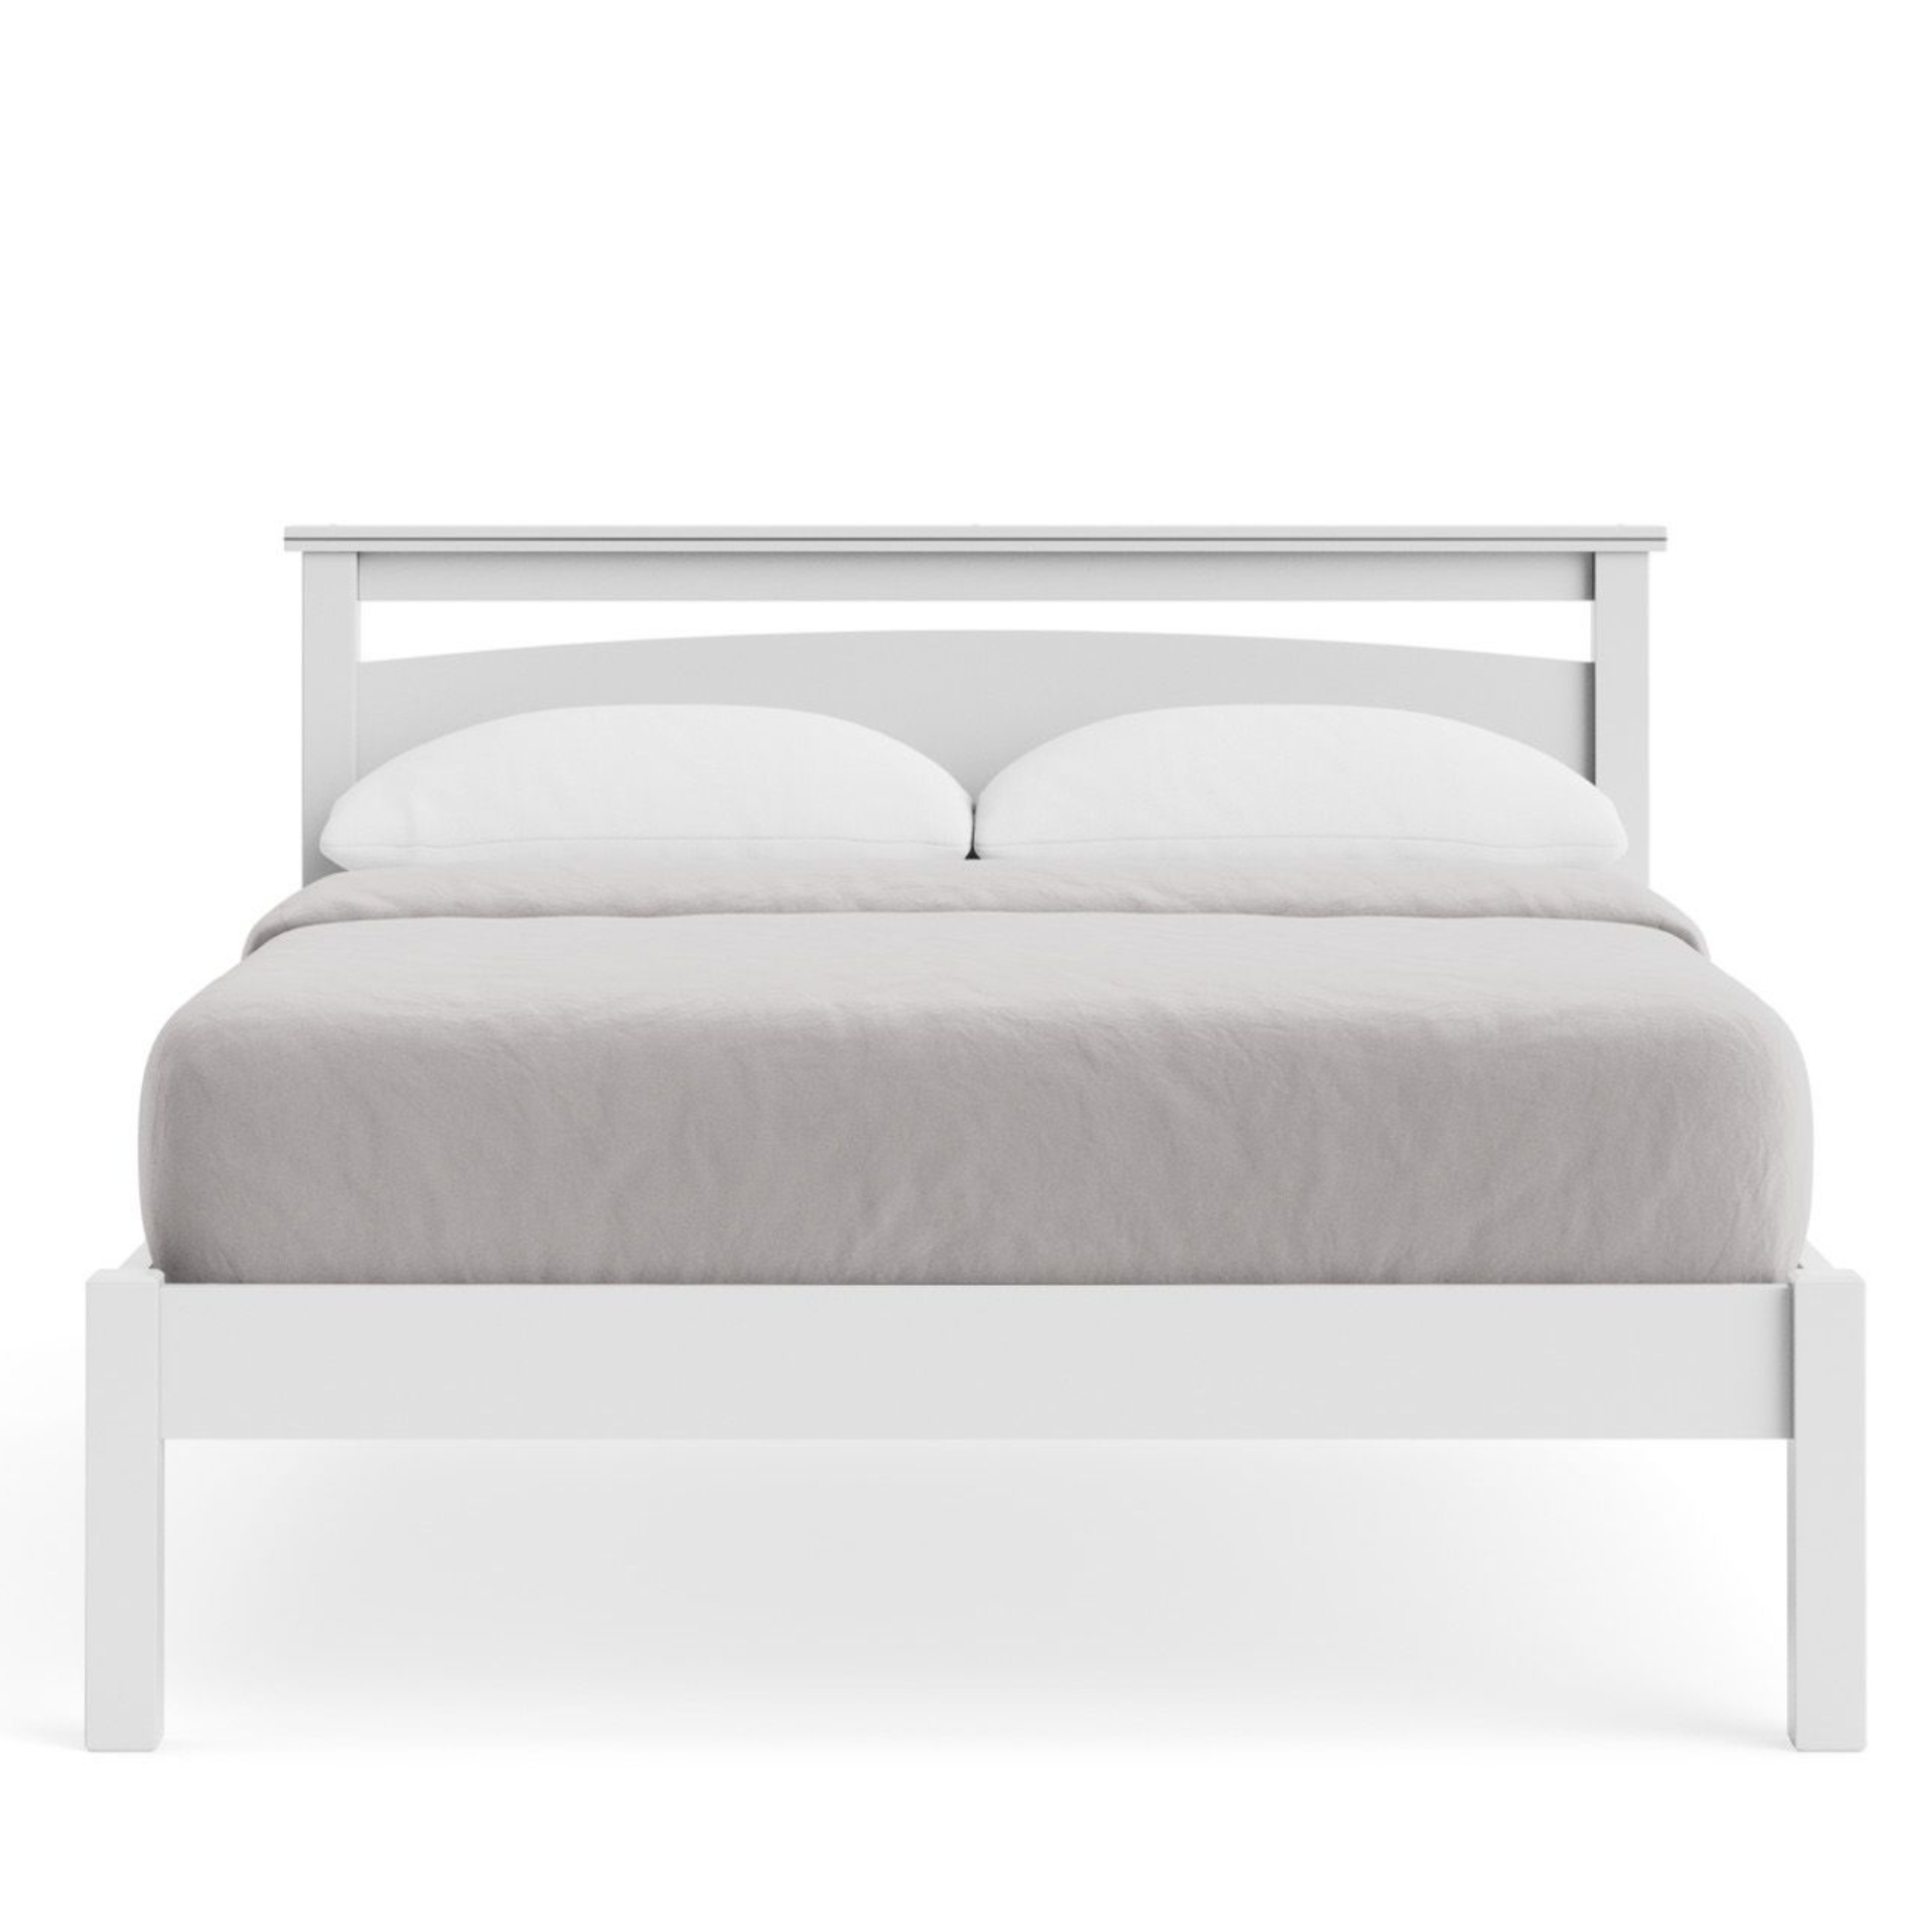 VENIECE SLAT BED LOW FOOT-END | SINGLE TO CALIFORNIAN KING | NZ MADE